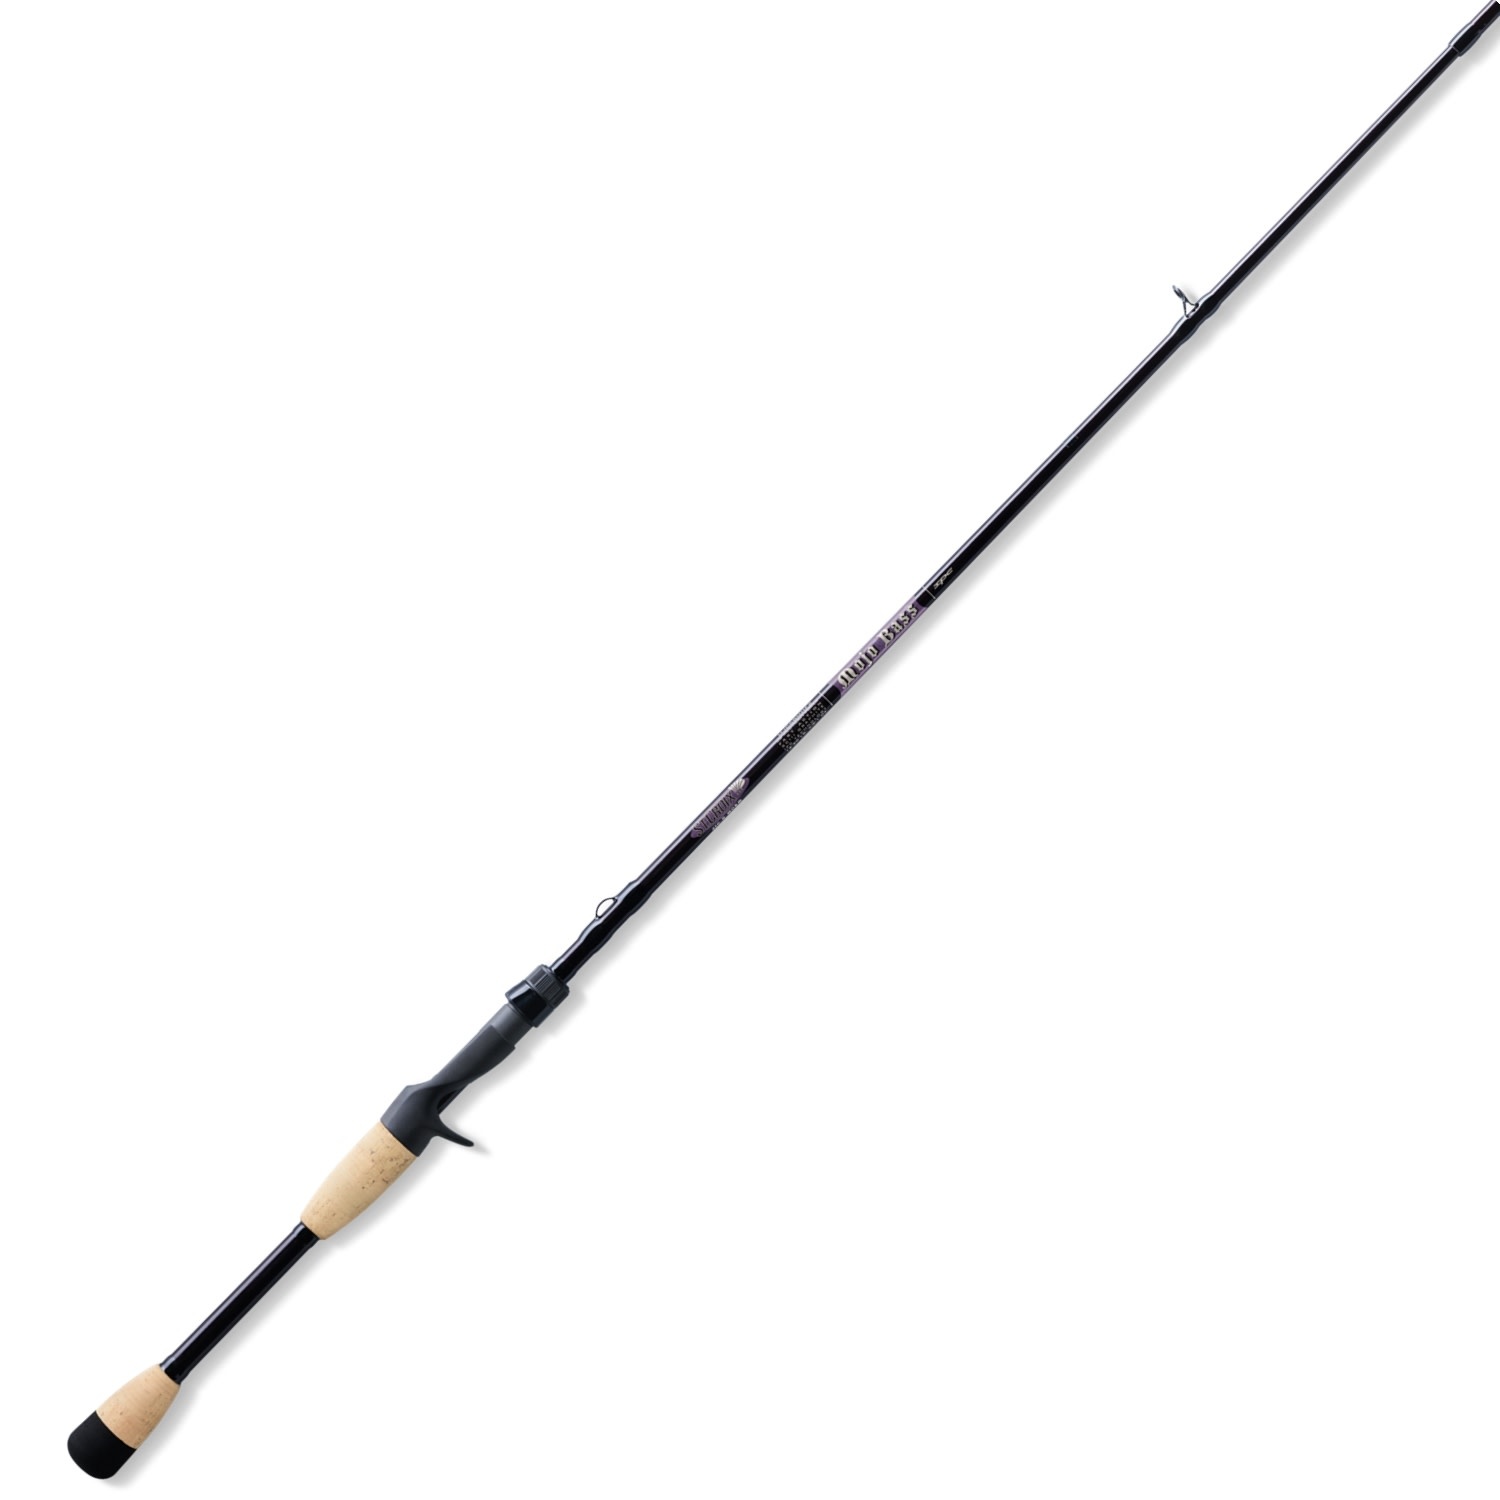 ST CROIX MOJO BASS CASTING RODS - Cabin Creek Supply